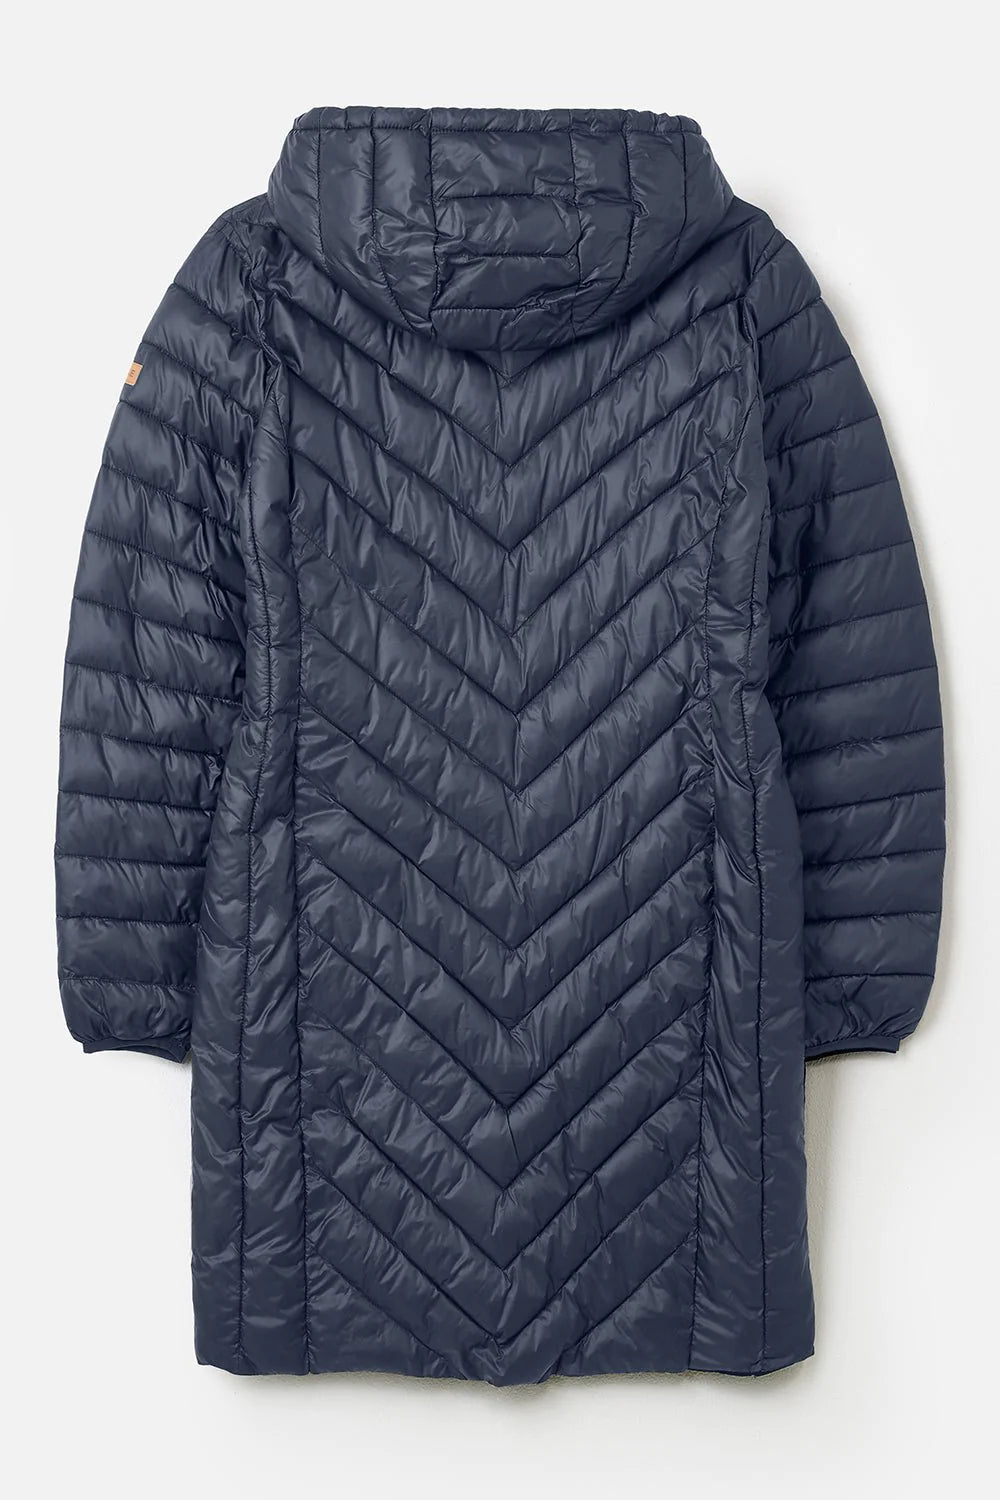 Padded hooded women's Laurel jacket in Navy from Lighthouse.